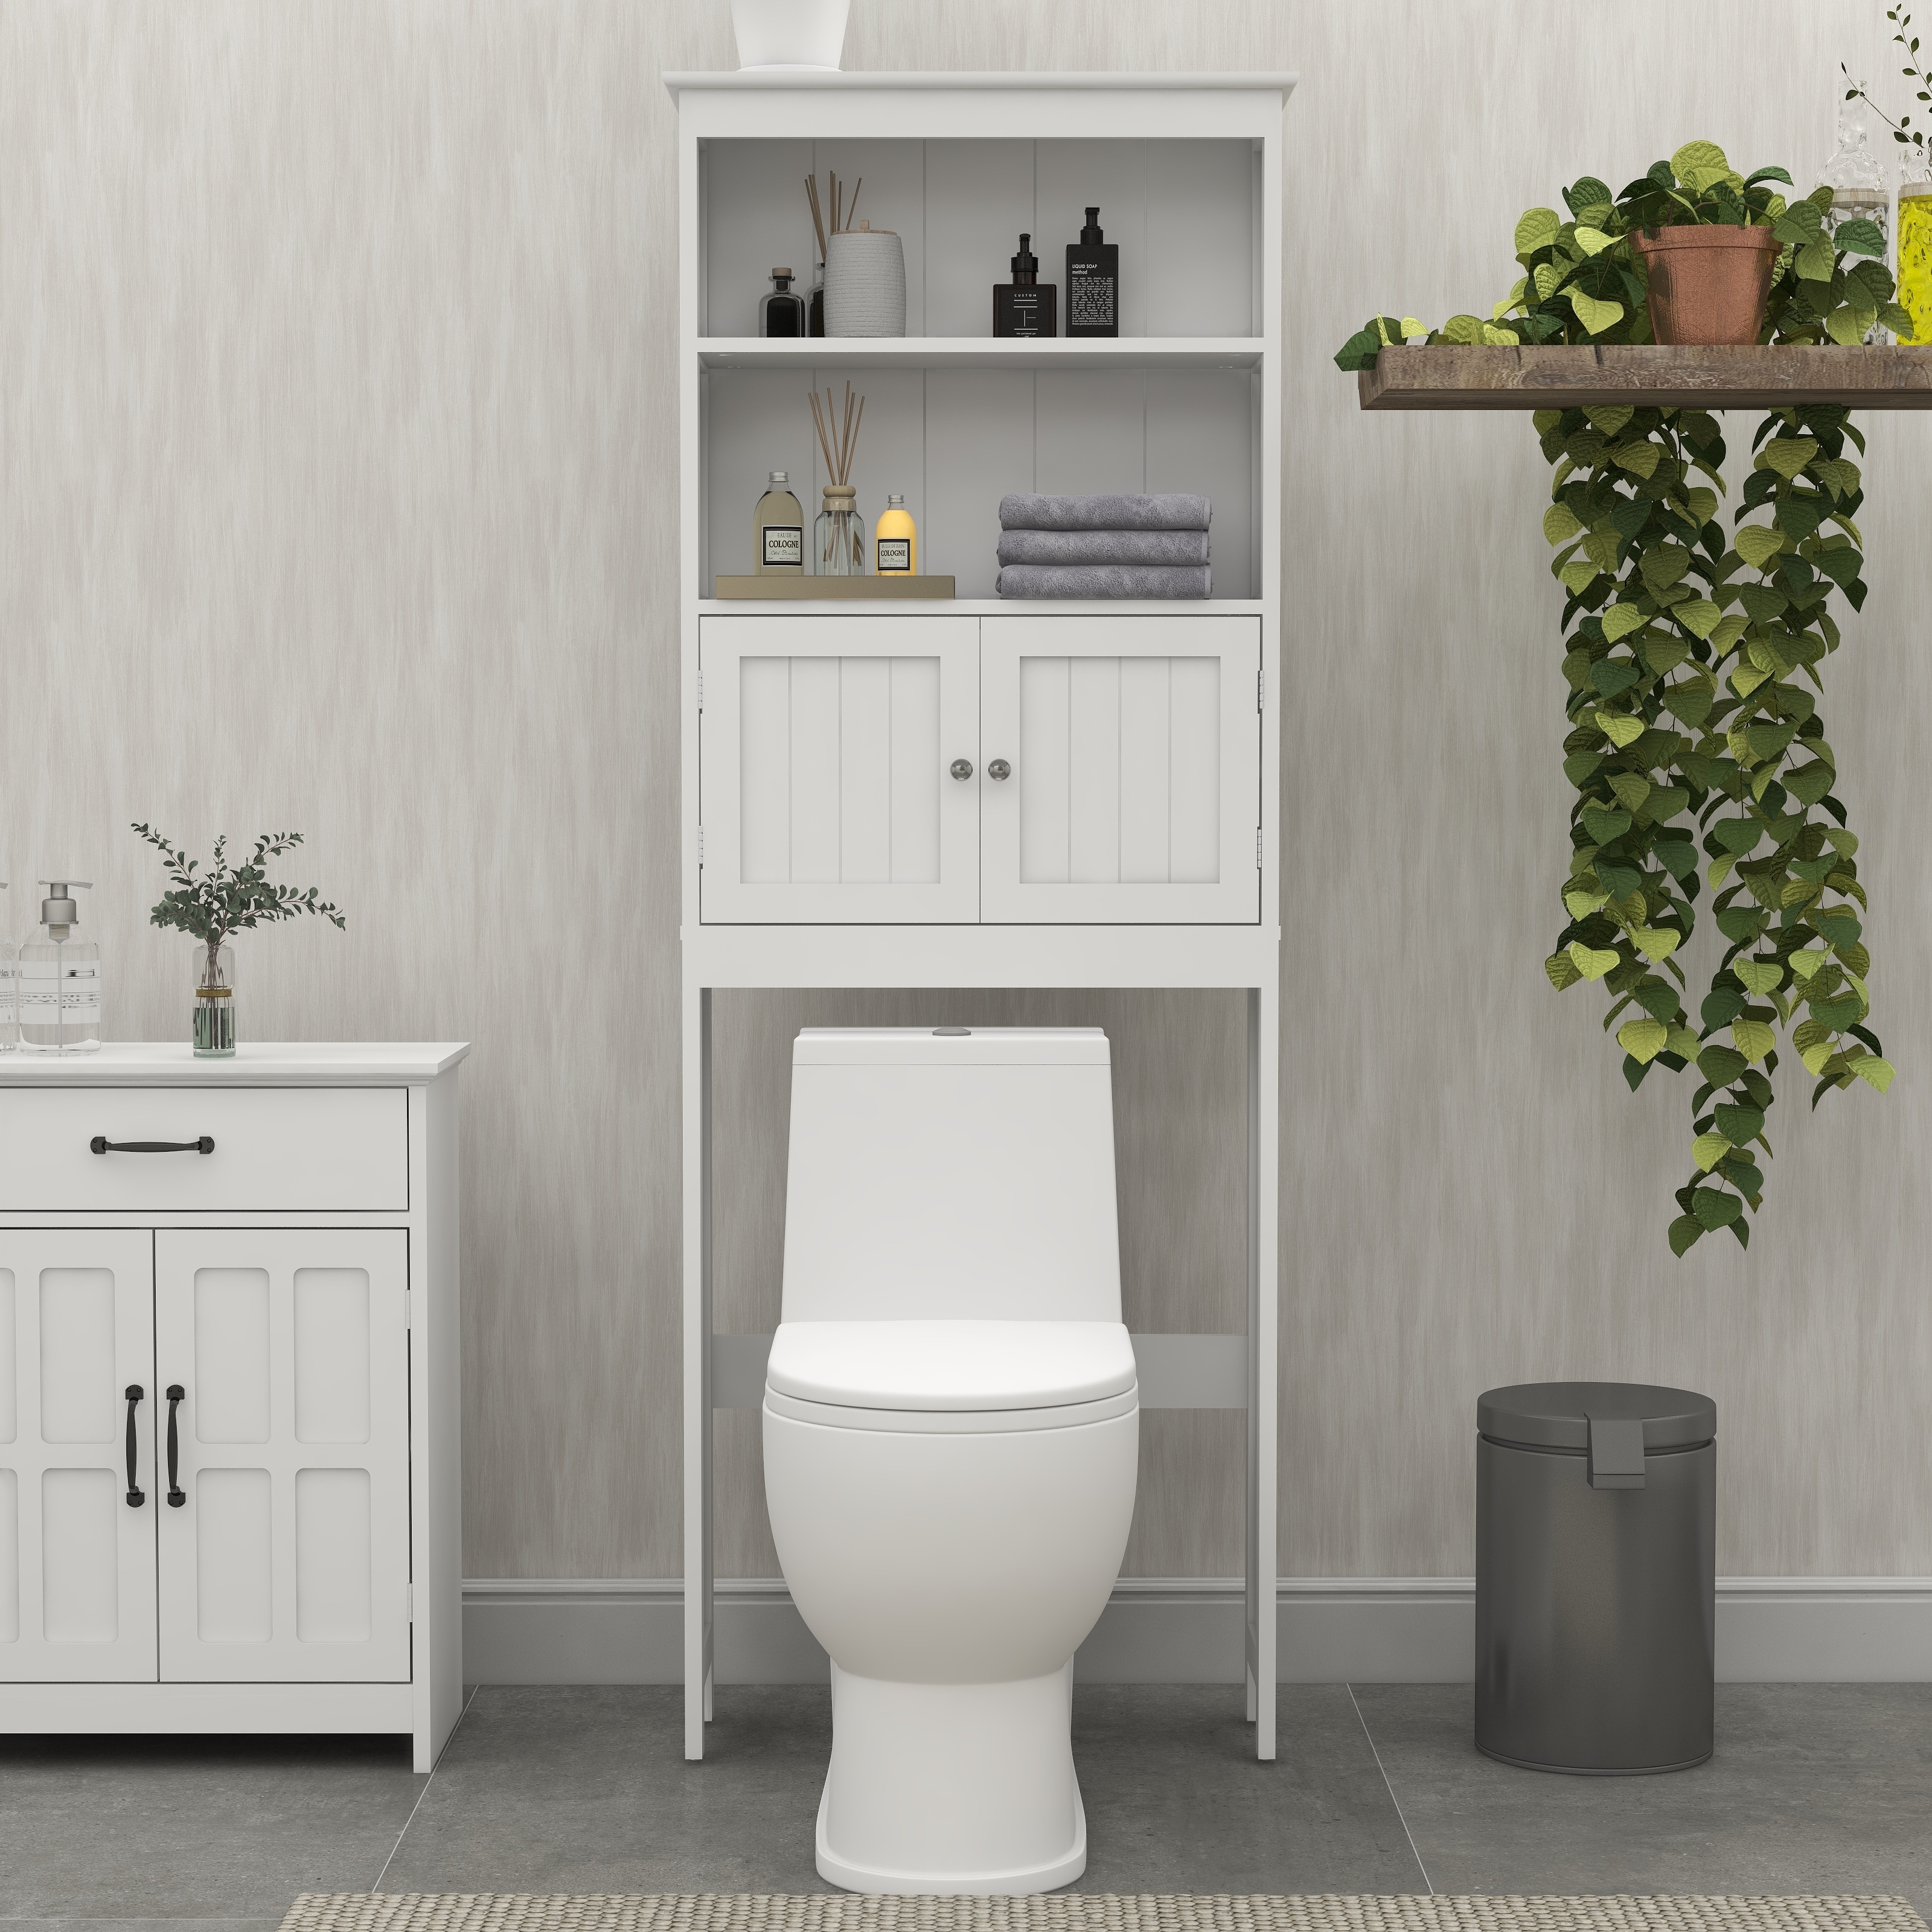 https://ak1.ostkcdn.com/images/products/is/images/direct/332572481a8b2e353c3842b2cd588cf3bb3ee78c/Over-The-Toilet-Rack-Freestanding-2--Tier-Toilet-Storage-Shelf-with-2-Doors-Wood-Storage-Organizer-Cabinet-for-Bathroom.jpg